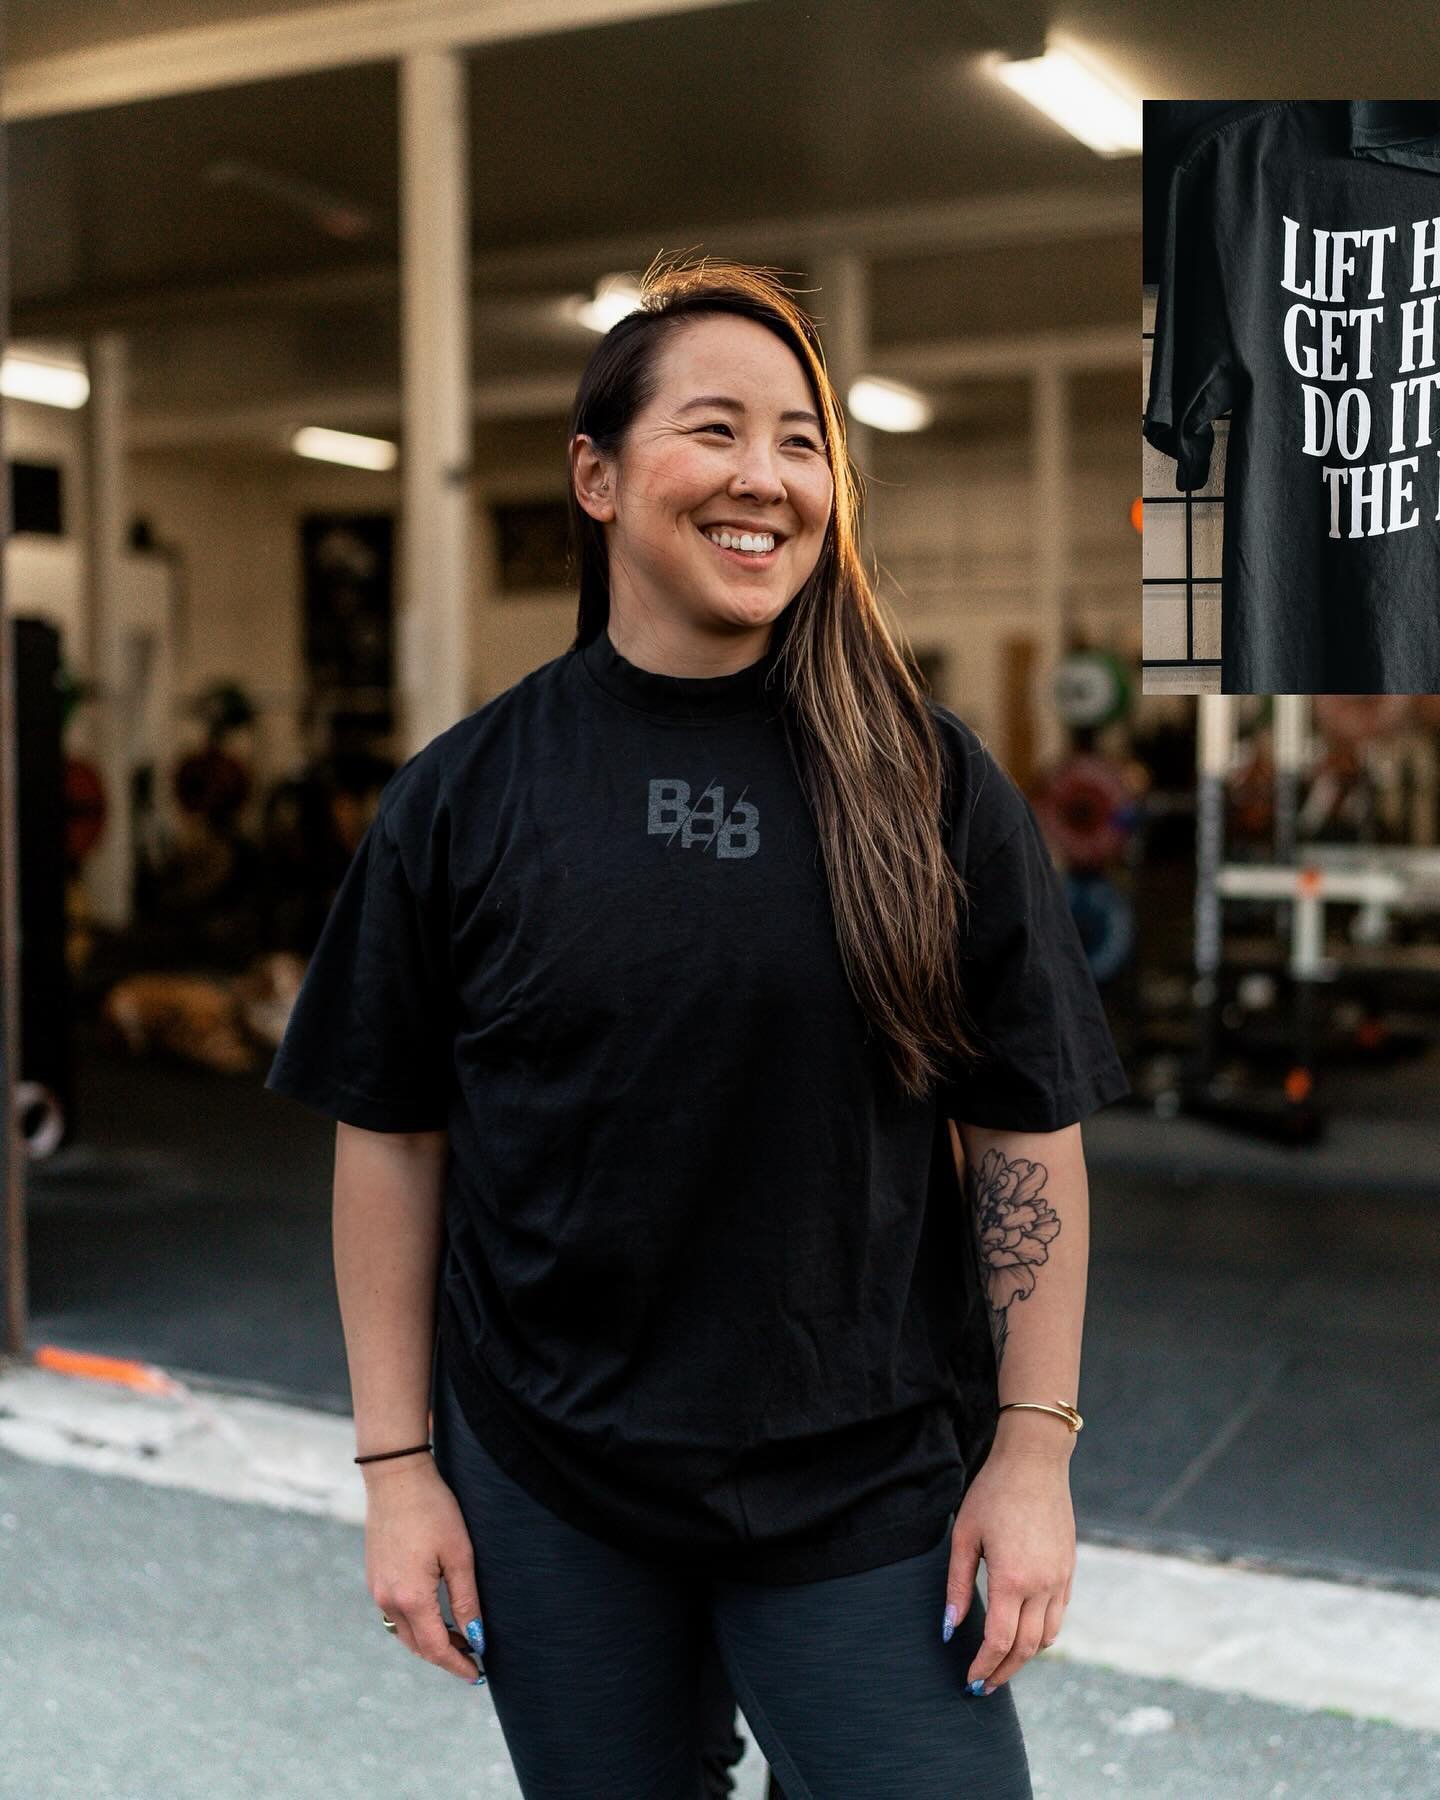 🚨 NEW DROP ALERT 🚨 

We had a soft launch of these shirts during our USAPL March BABness meet on Saturday, but we&rsquo;re back with an official launch for them. The only place you can lift heavy, get hyphy and do it for the bay: Bay Area Barbell. 